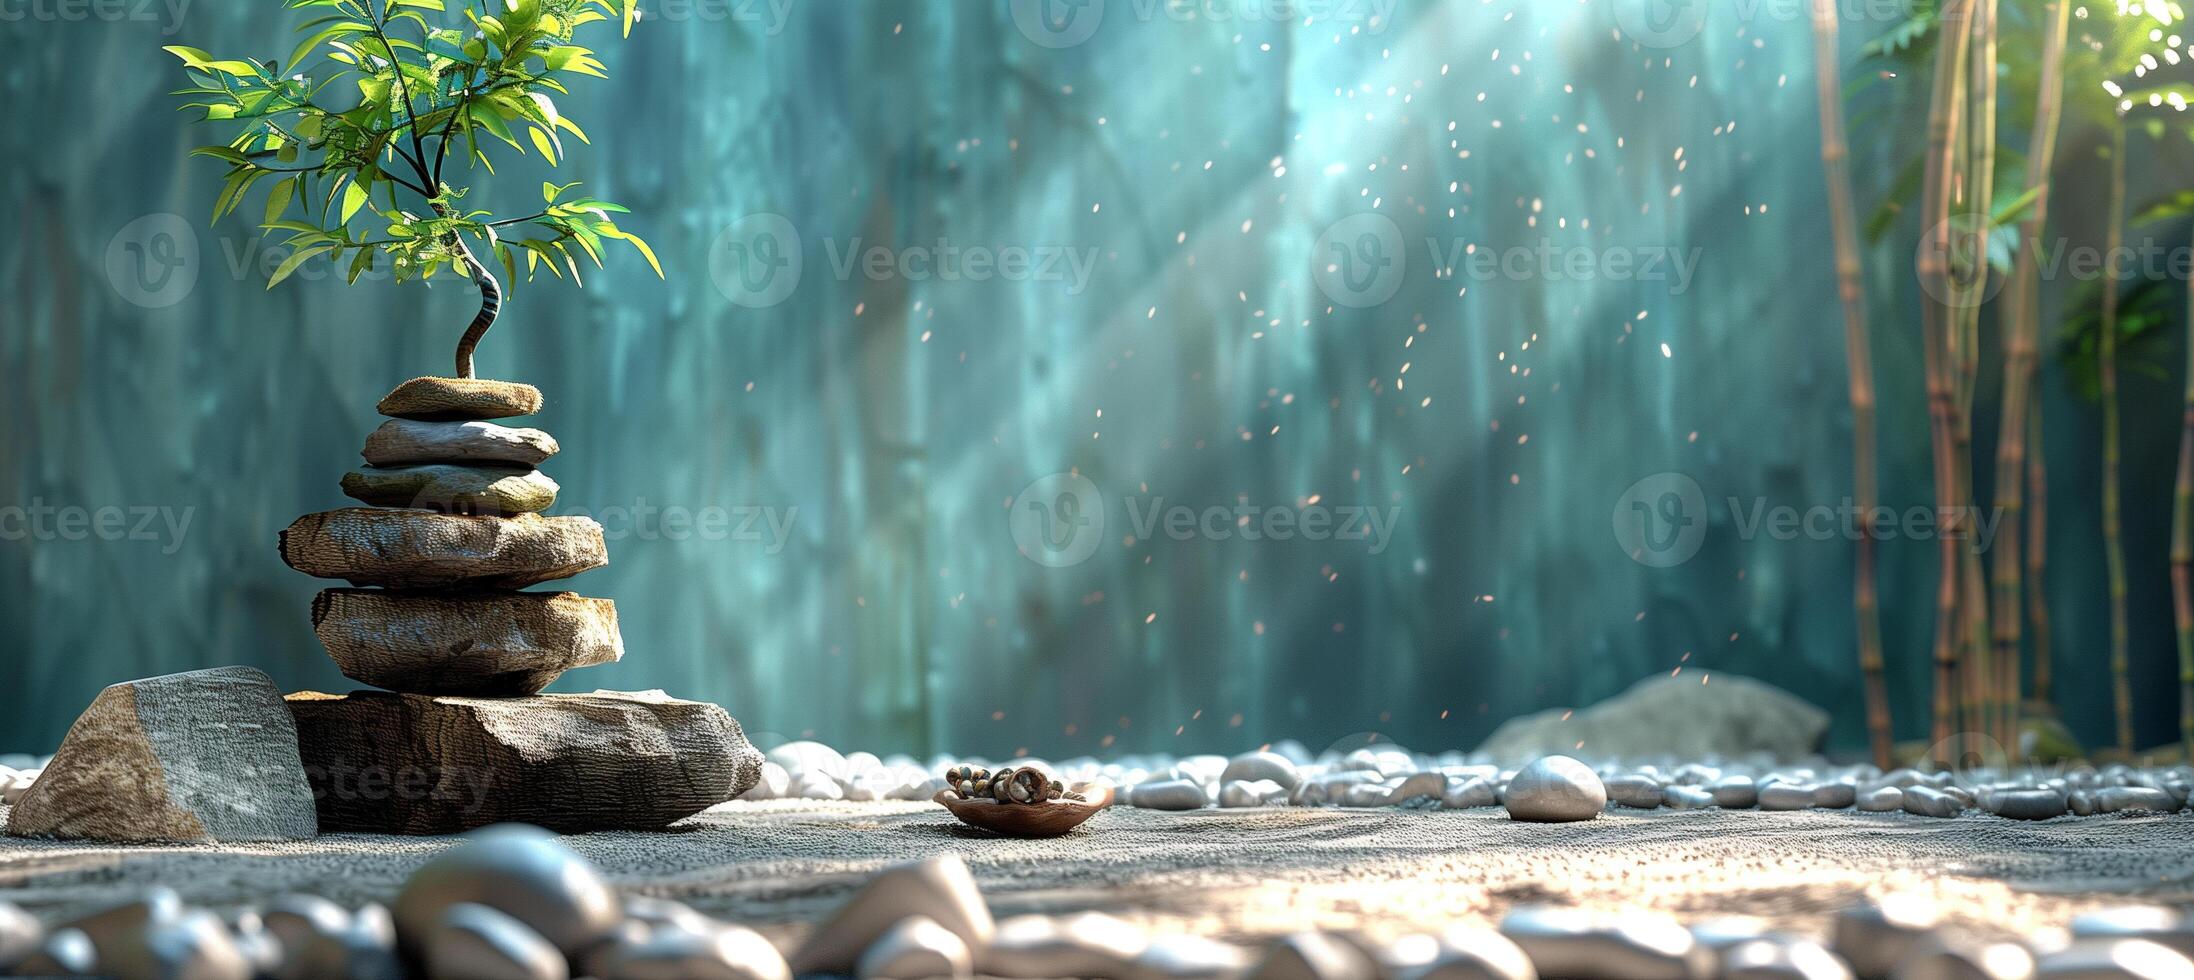 AI generated Background for advertisement, with inspiring meditation elements, tranquil garden scene with a stack of balanced stones, flourishing plant on top, peace and balance atmosphere photo